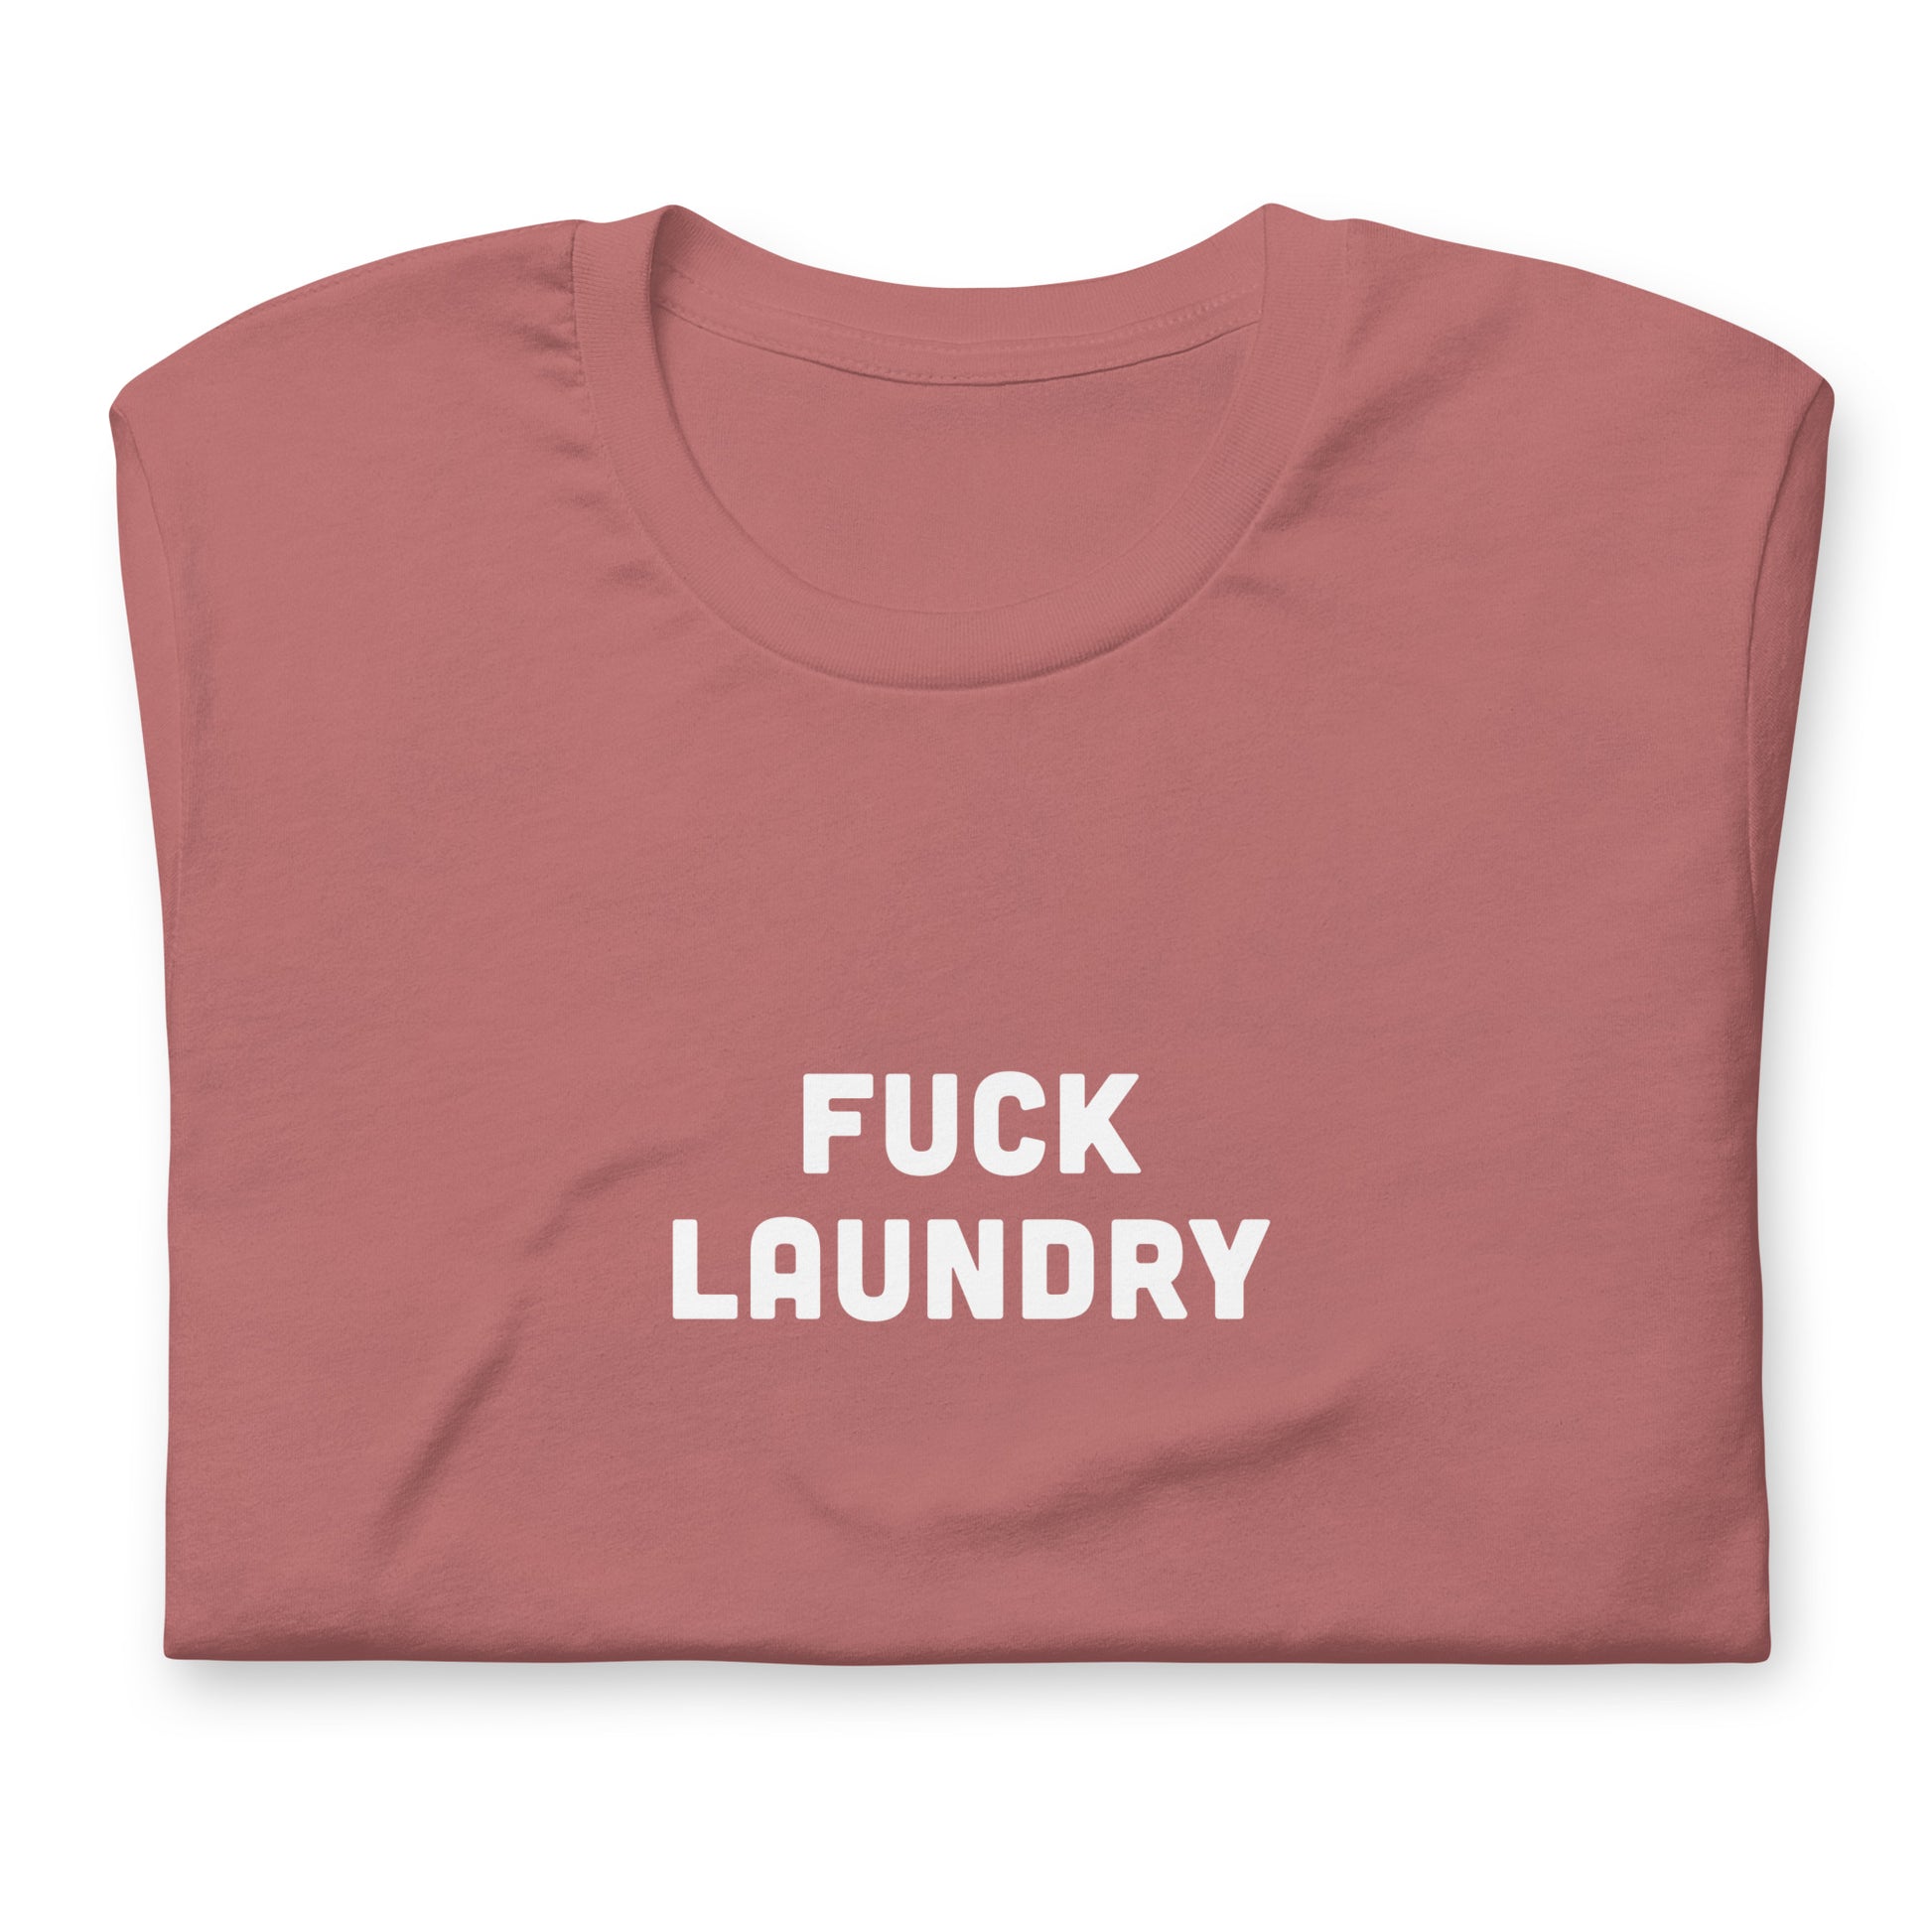 Fuck Laundry T-Shirt Size 2XL Color Navy